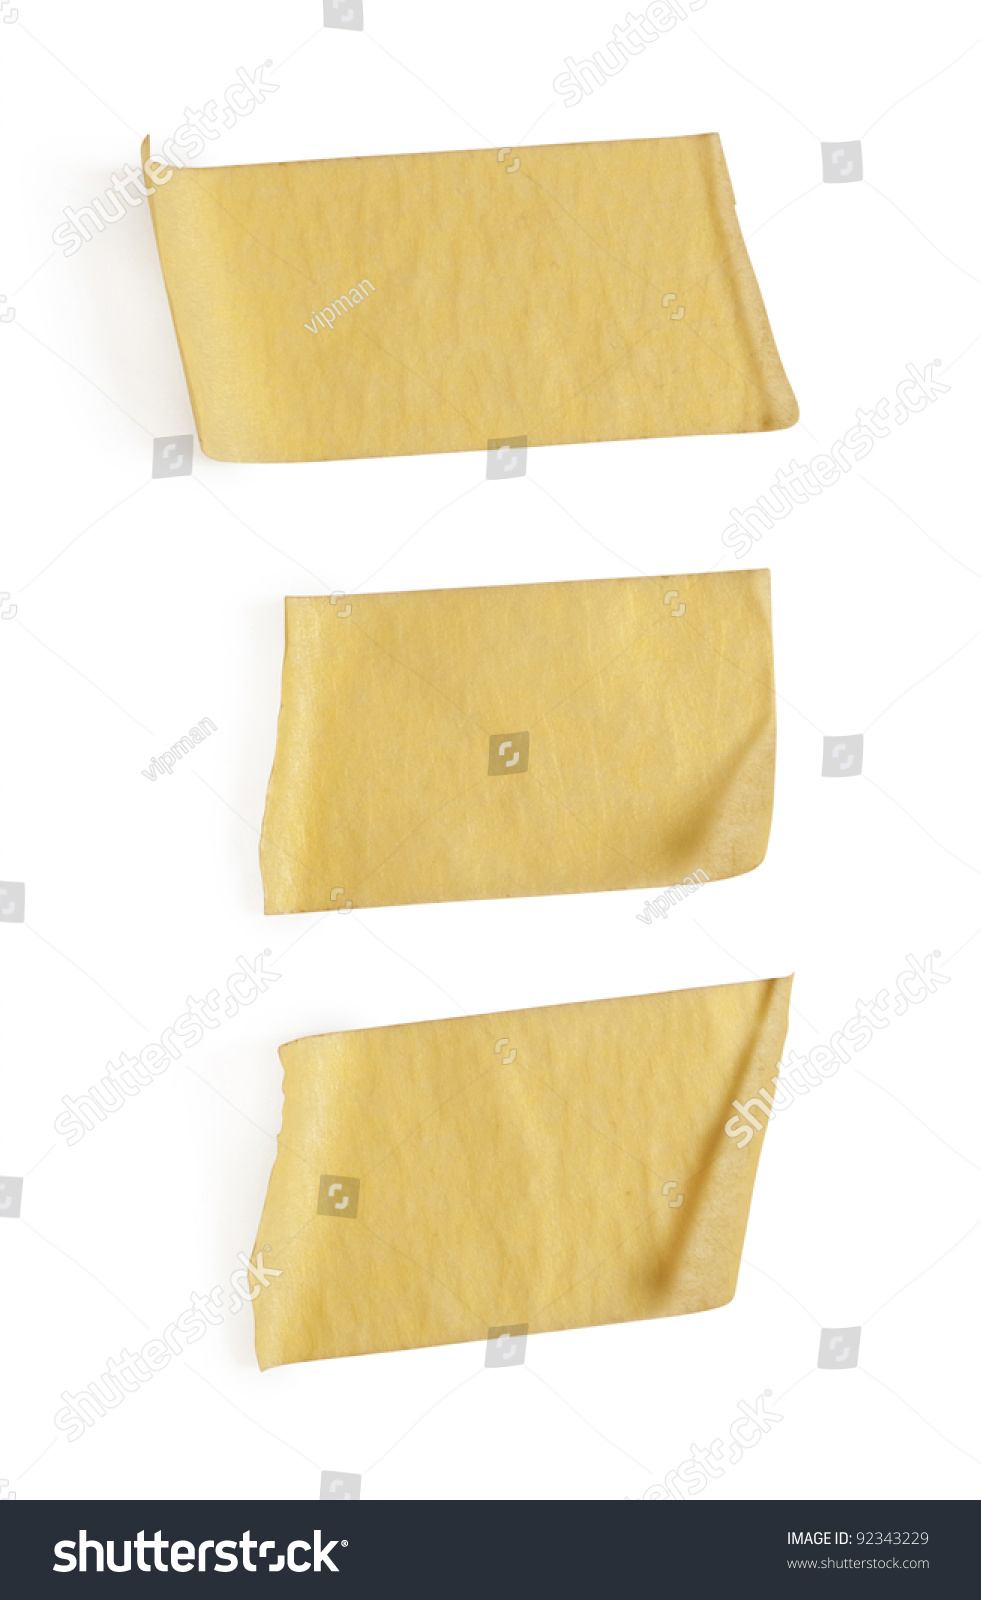 Collection Of Various Adhesive Tape Pieces On White Background Stock ...